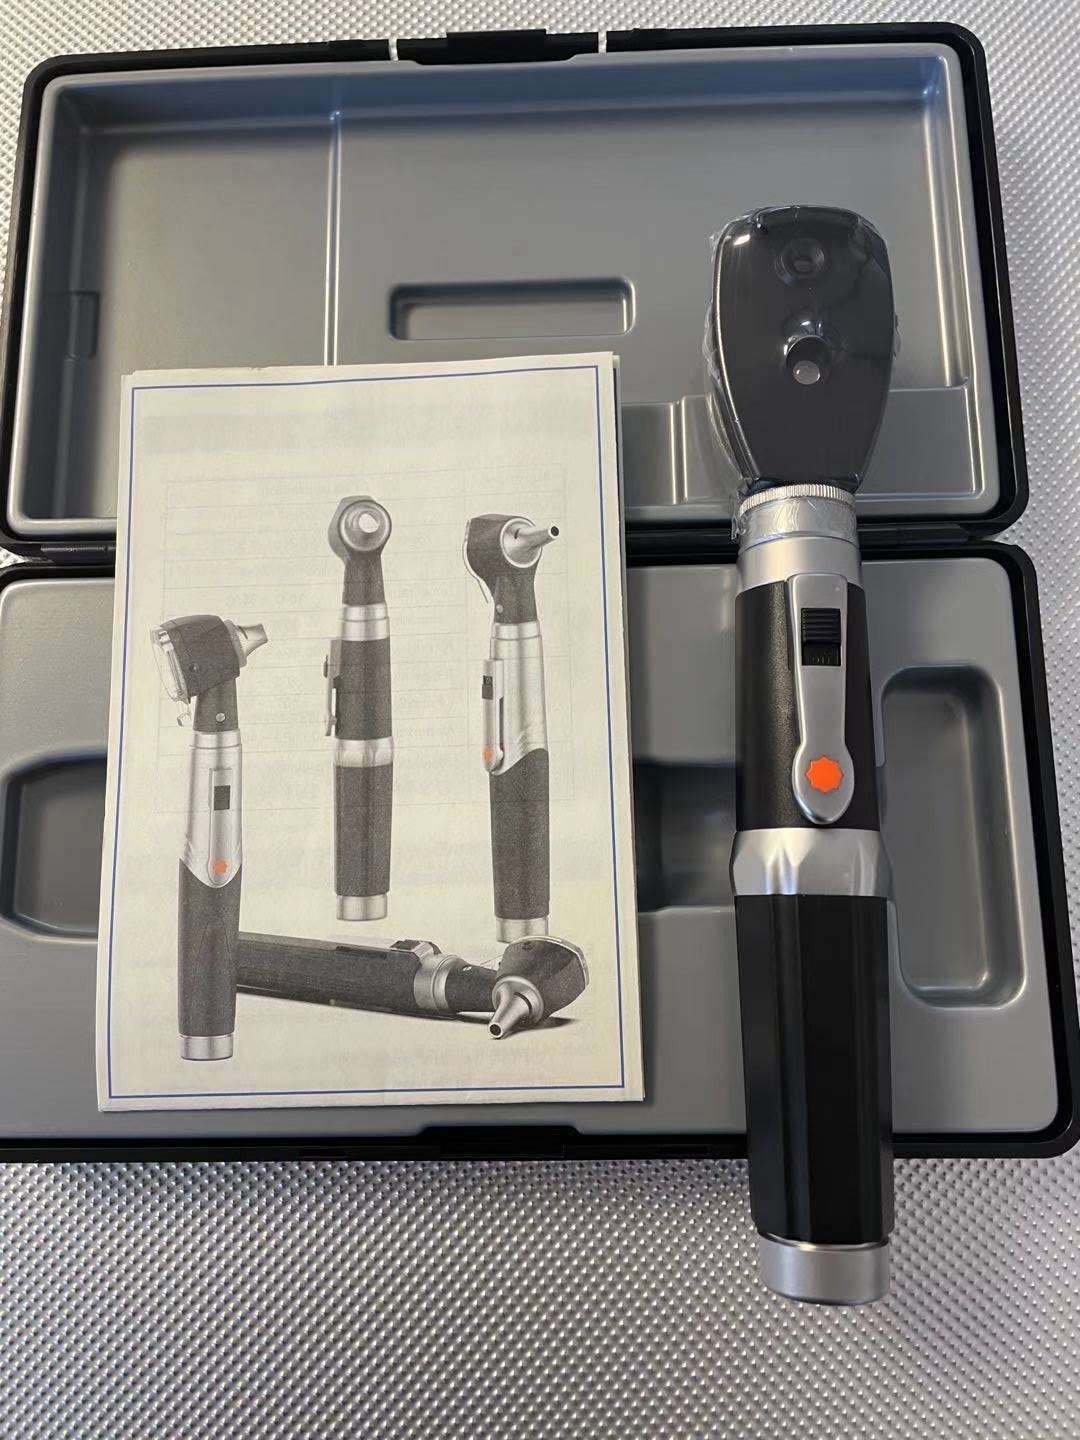 BPM-P100 Lens Unit Ophthalmoscope